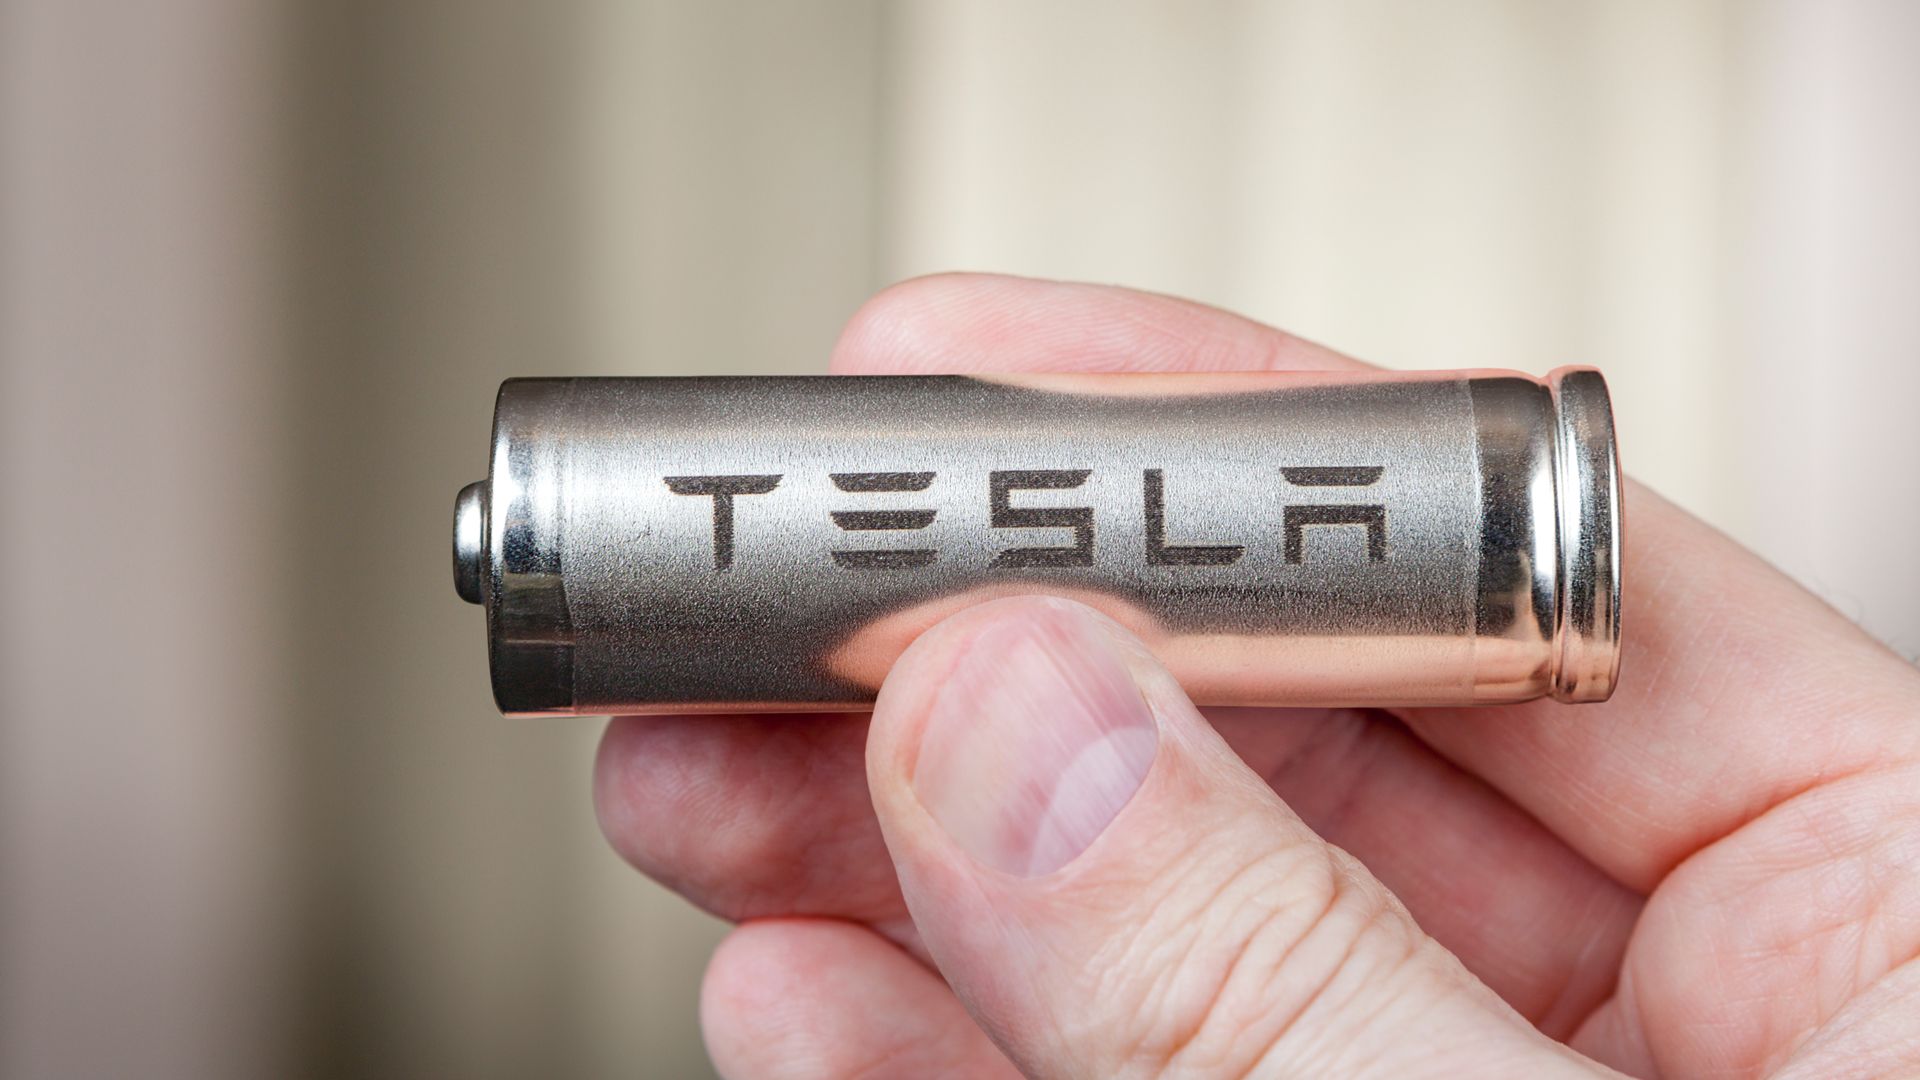 Tesla battery cell in a hand